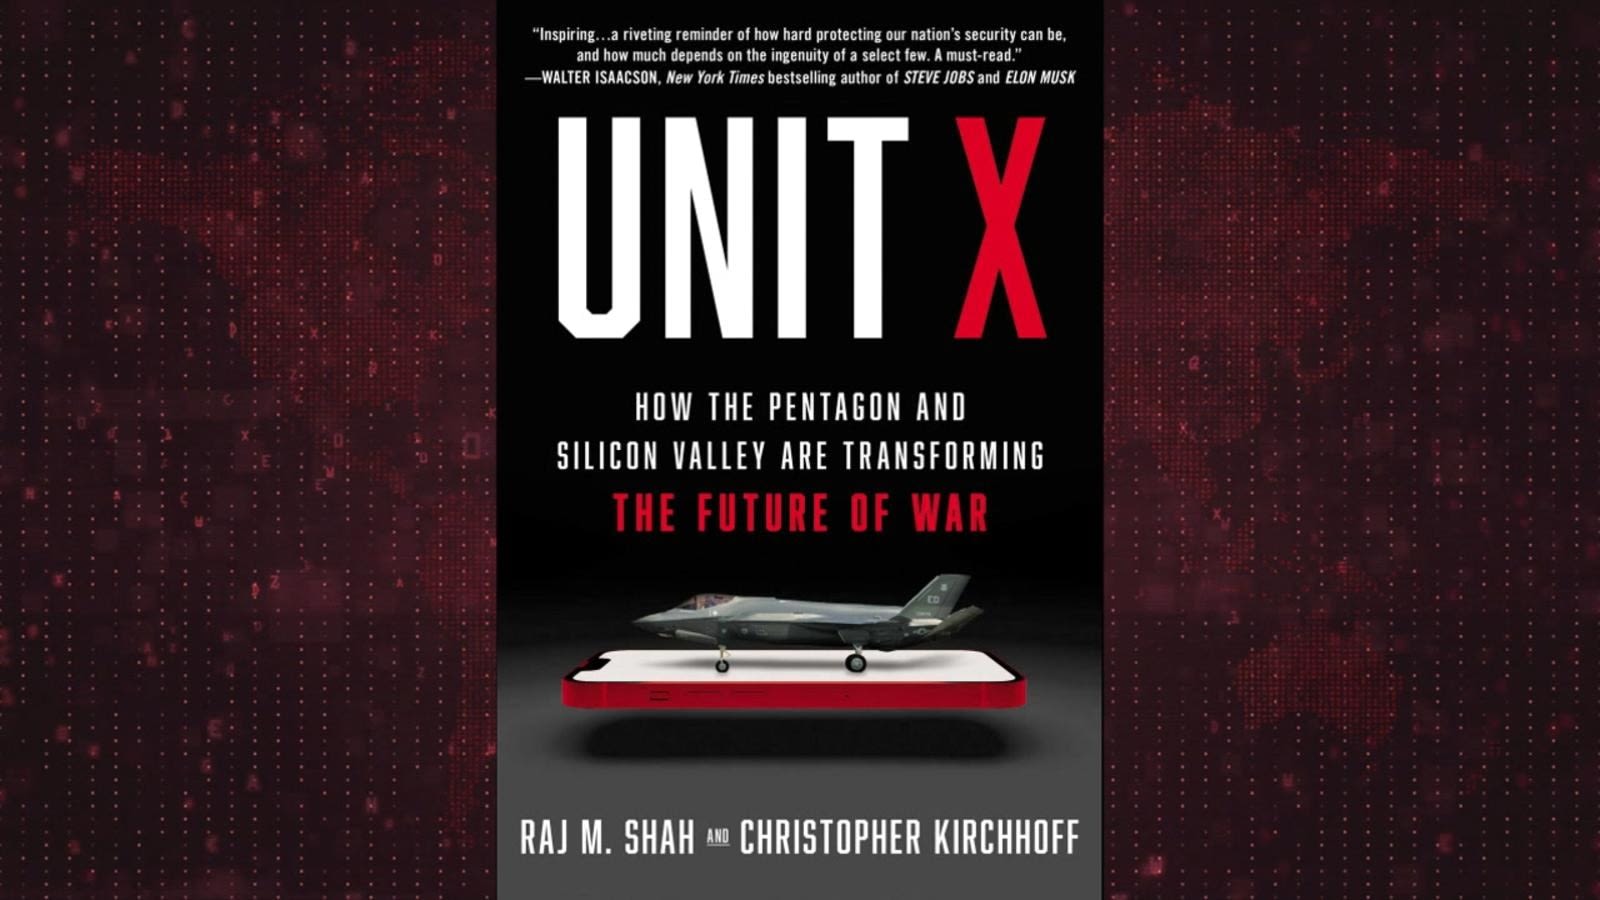 Author discusses how the Pentagon and Silicon Valley are transforming the future of war